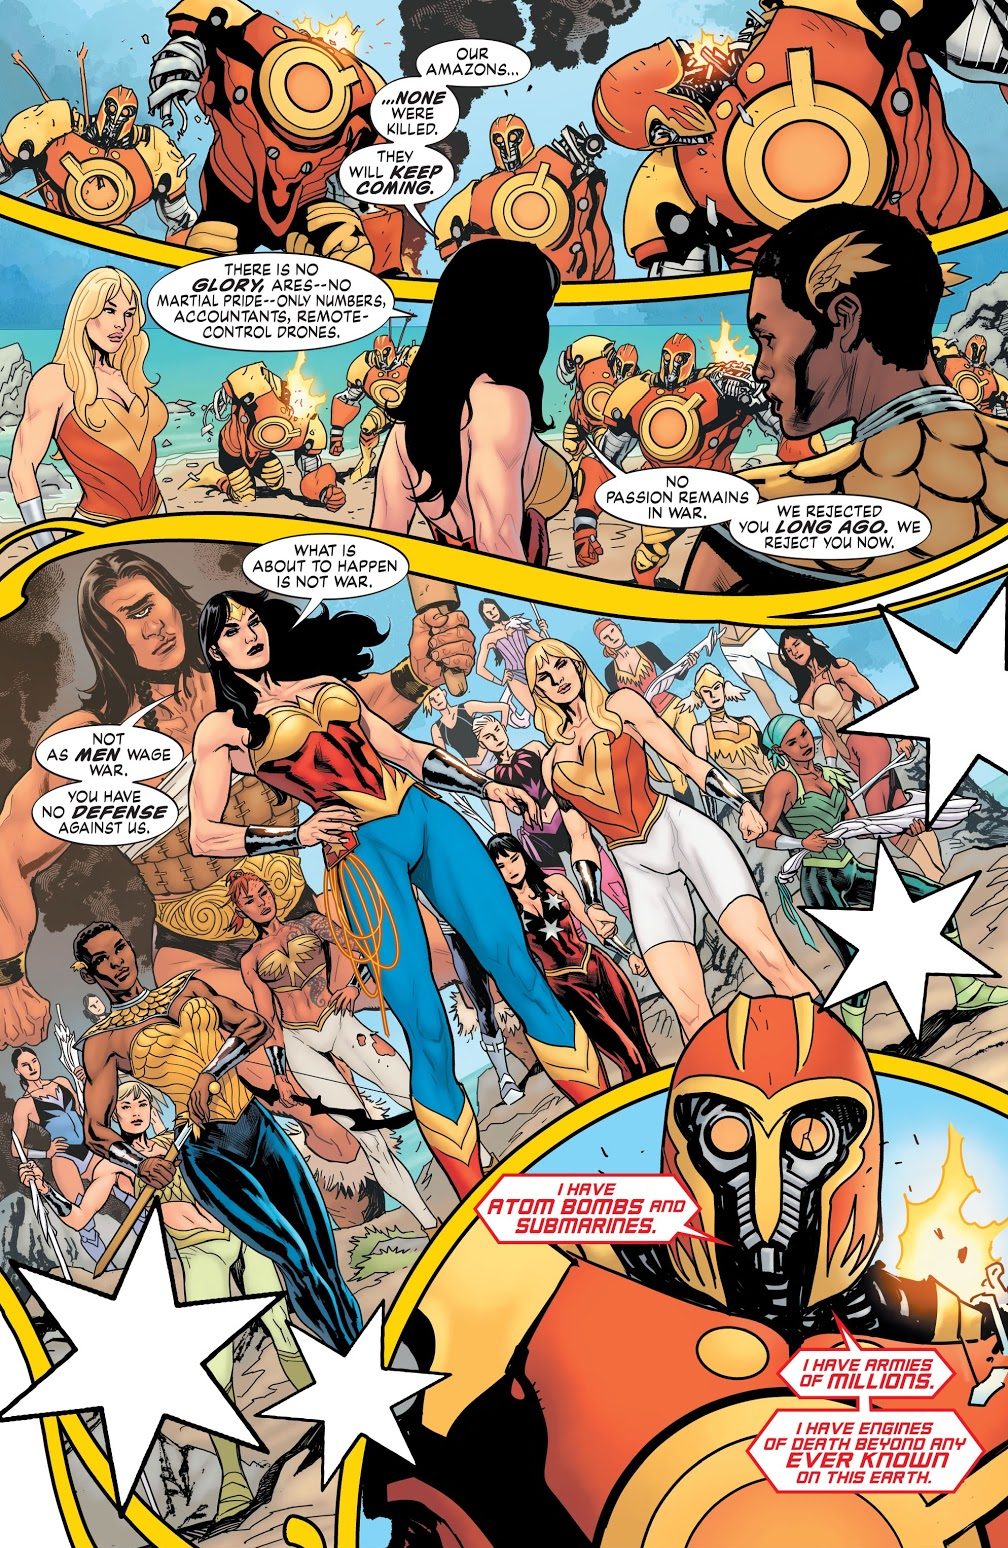 Wonder Woman VS ARES Mark 1 (Earth One)